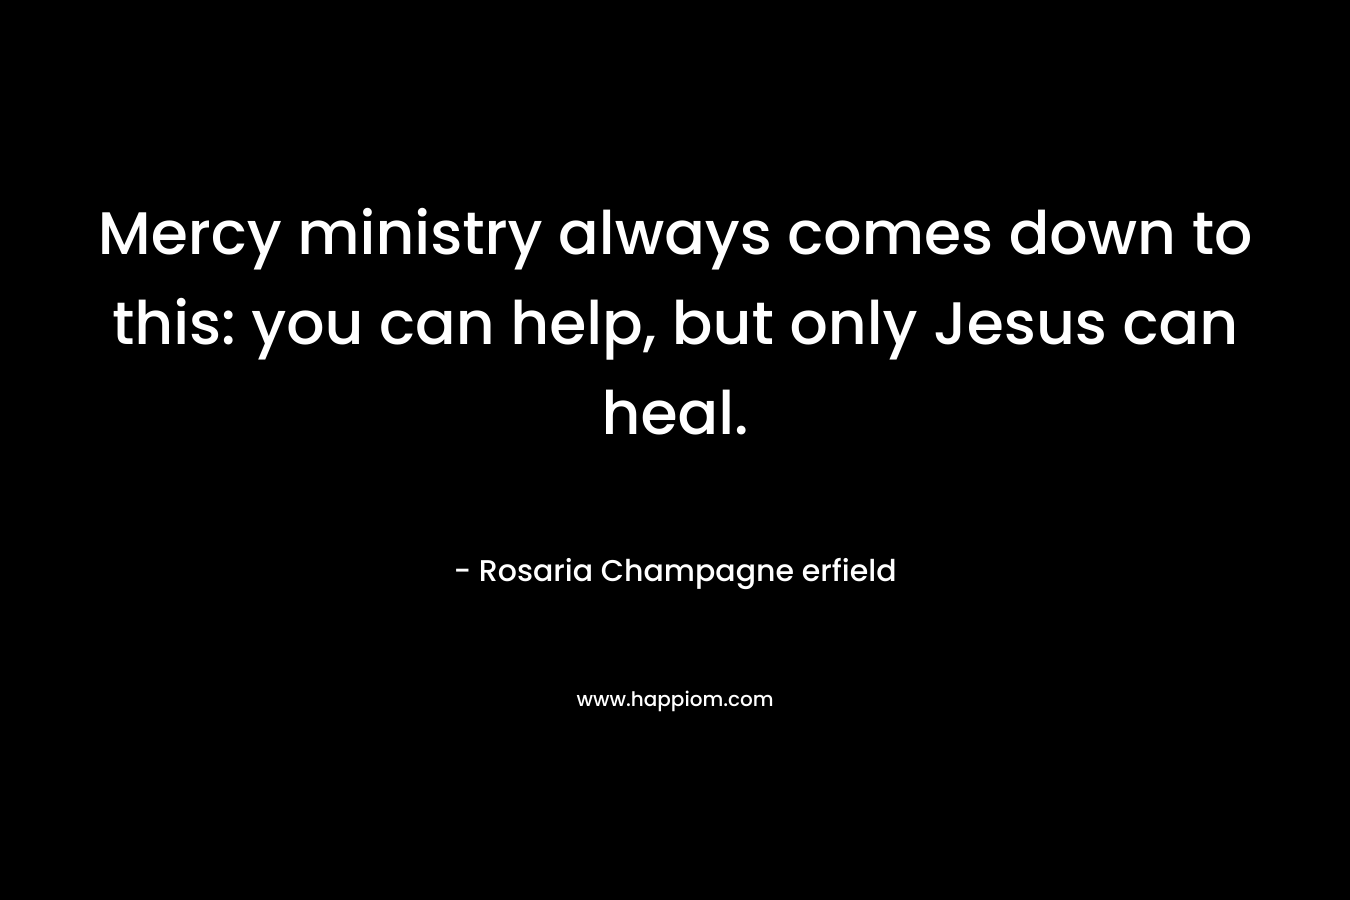 Mercy ministry always comes down to this: you can help, but only Jesus can heal.